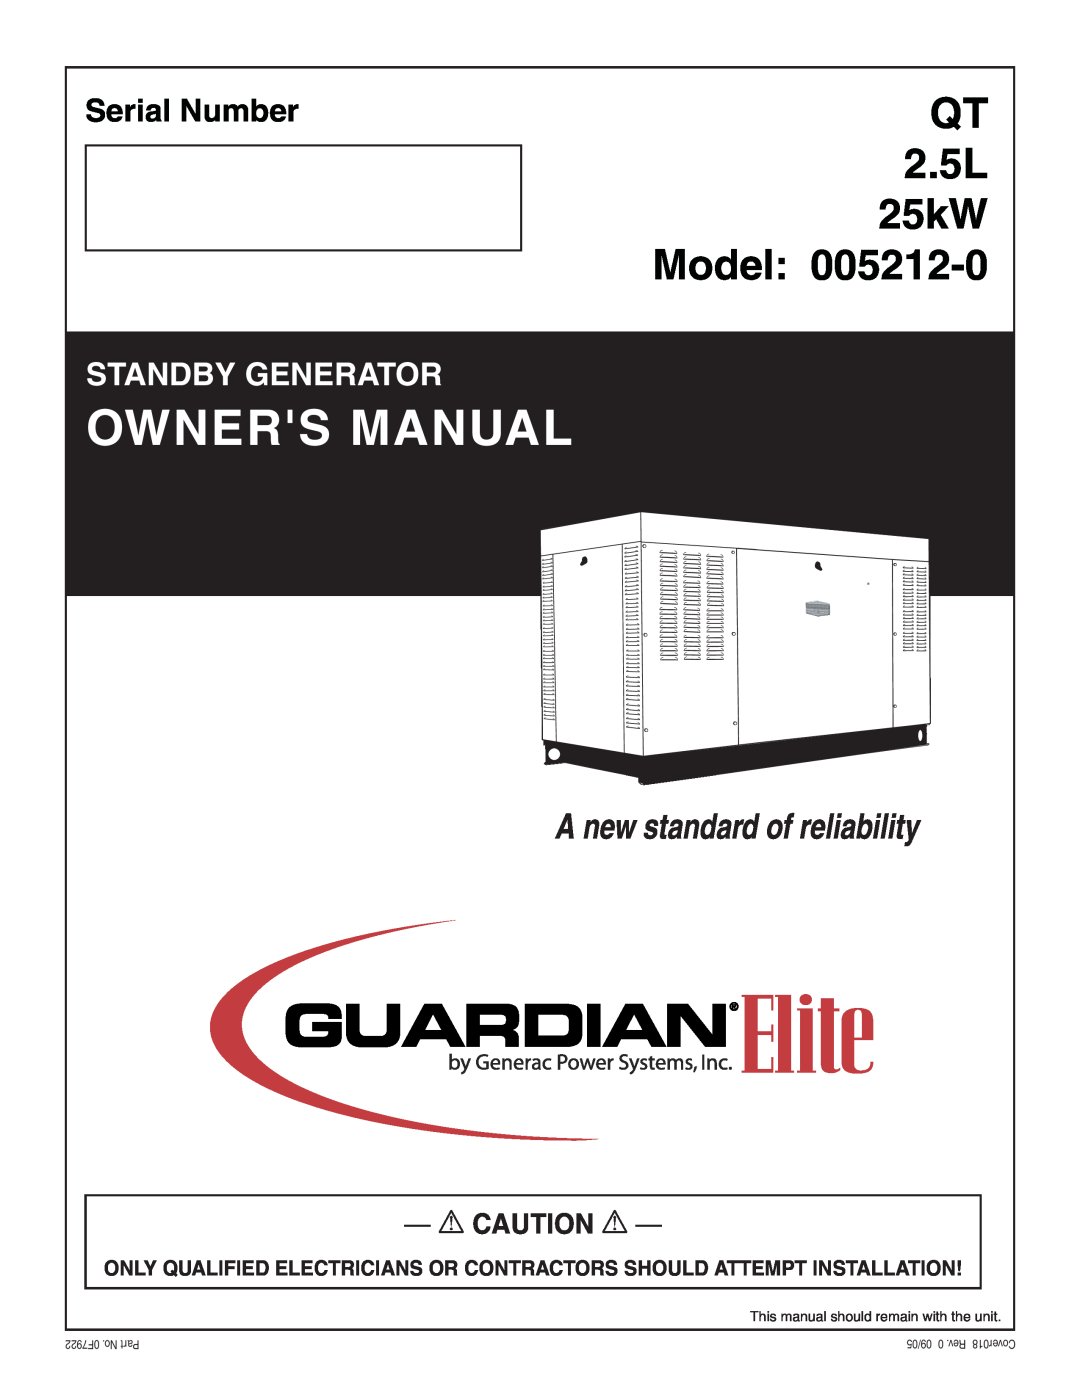 Elite 005212-0 owner manual Model, QT 2.5L 25kW, A new standard of reliability, Serial Number, Standby Generator 